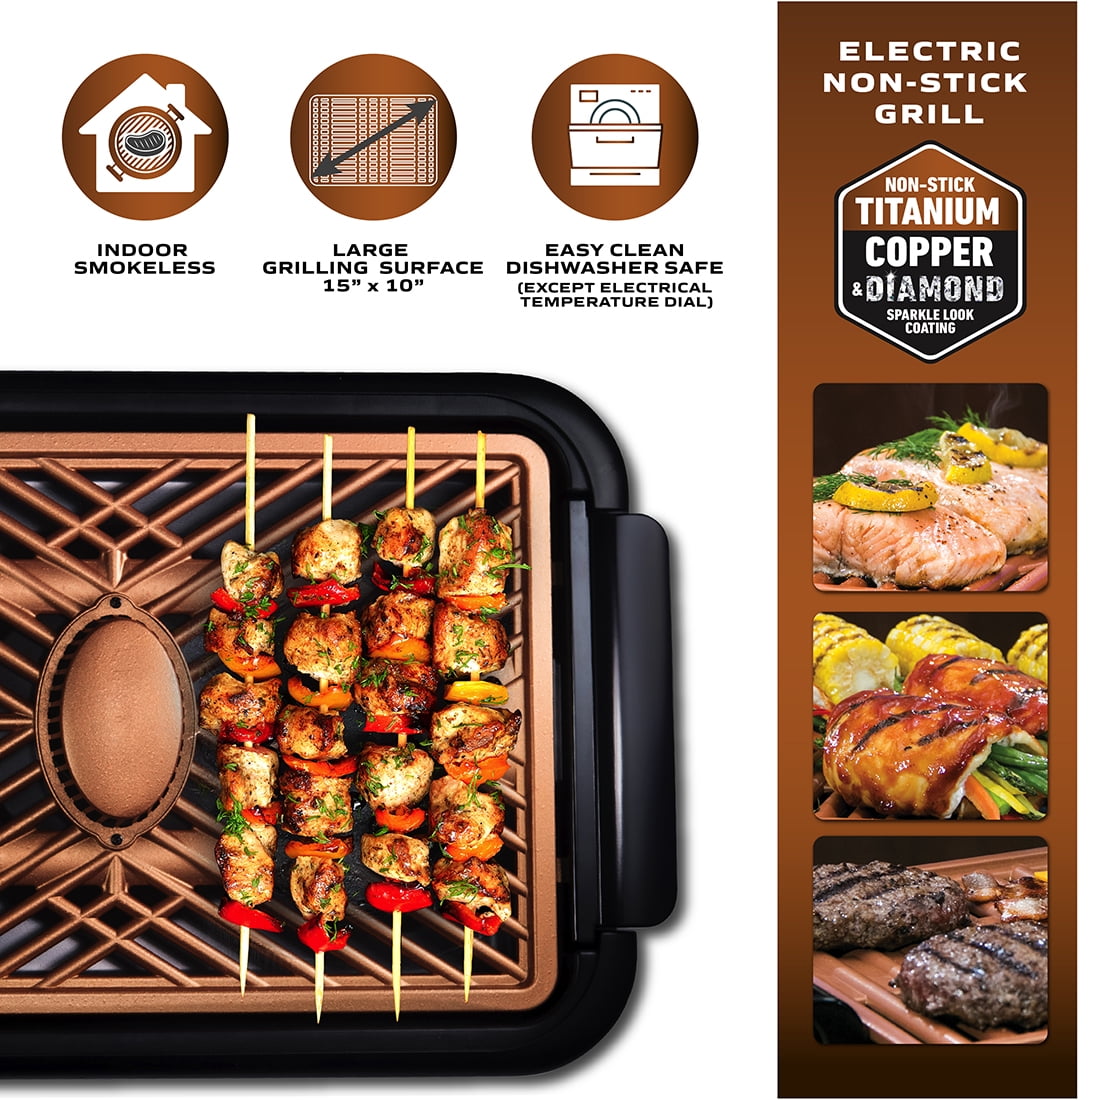 Gotham Steel Smokeless Grill with Fan, Indoor Grill Ultra Nonstick Electric Grill Dishwasher Safe Surface, Temp Control, Metal Utensil Safe, Barbeque Indoor Grill, As Seen on TV - 1